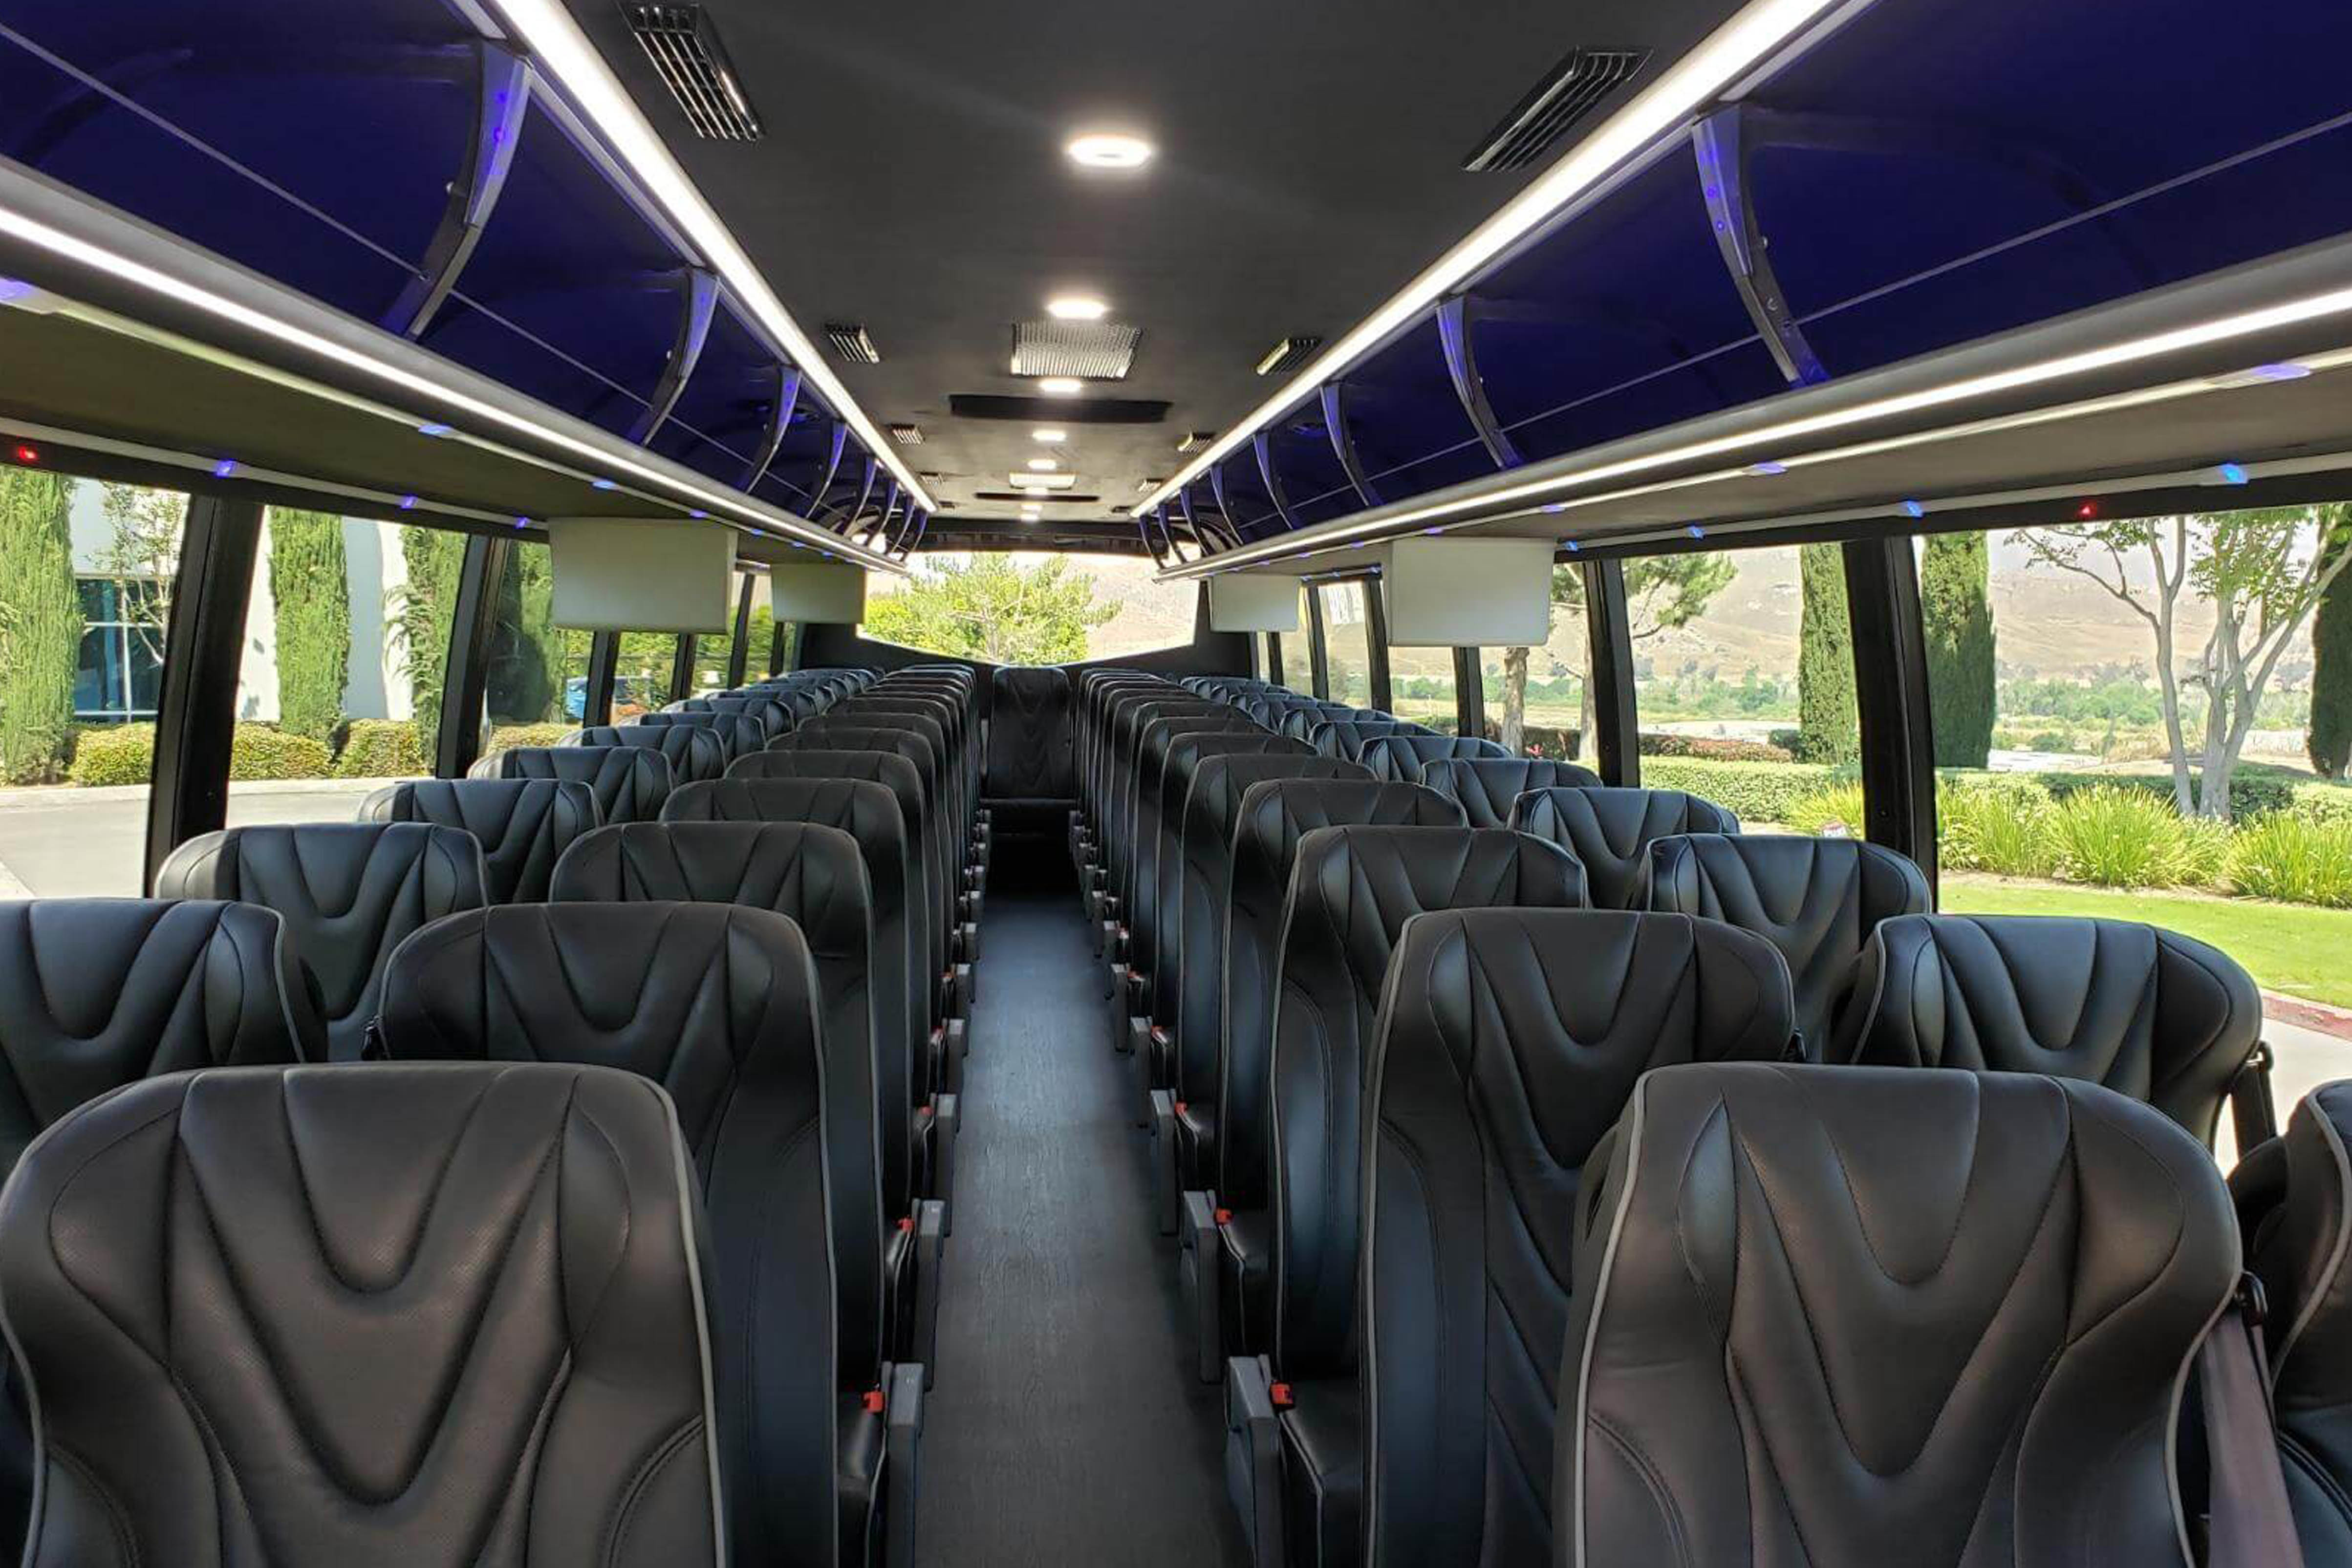 Ample interior to accommodate groups